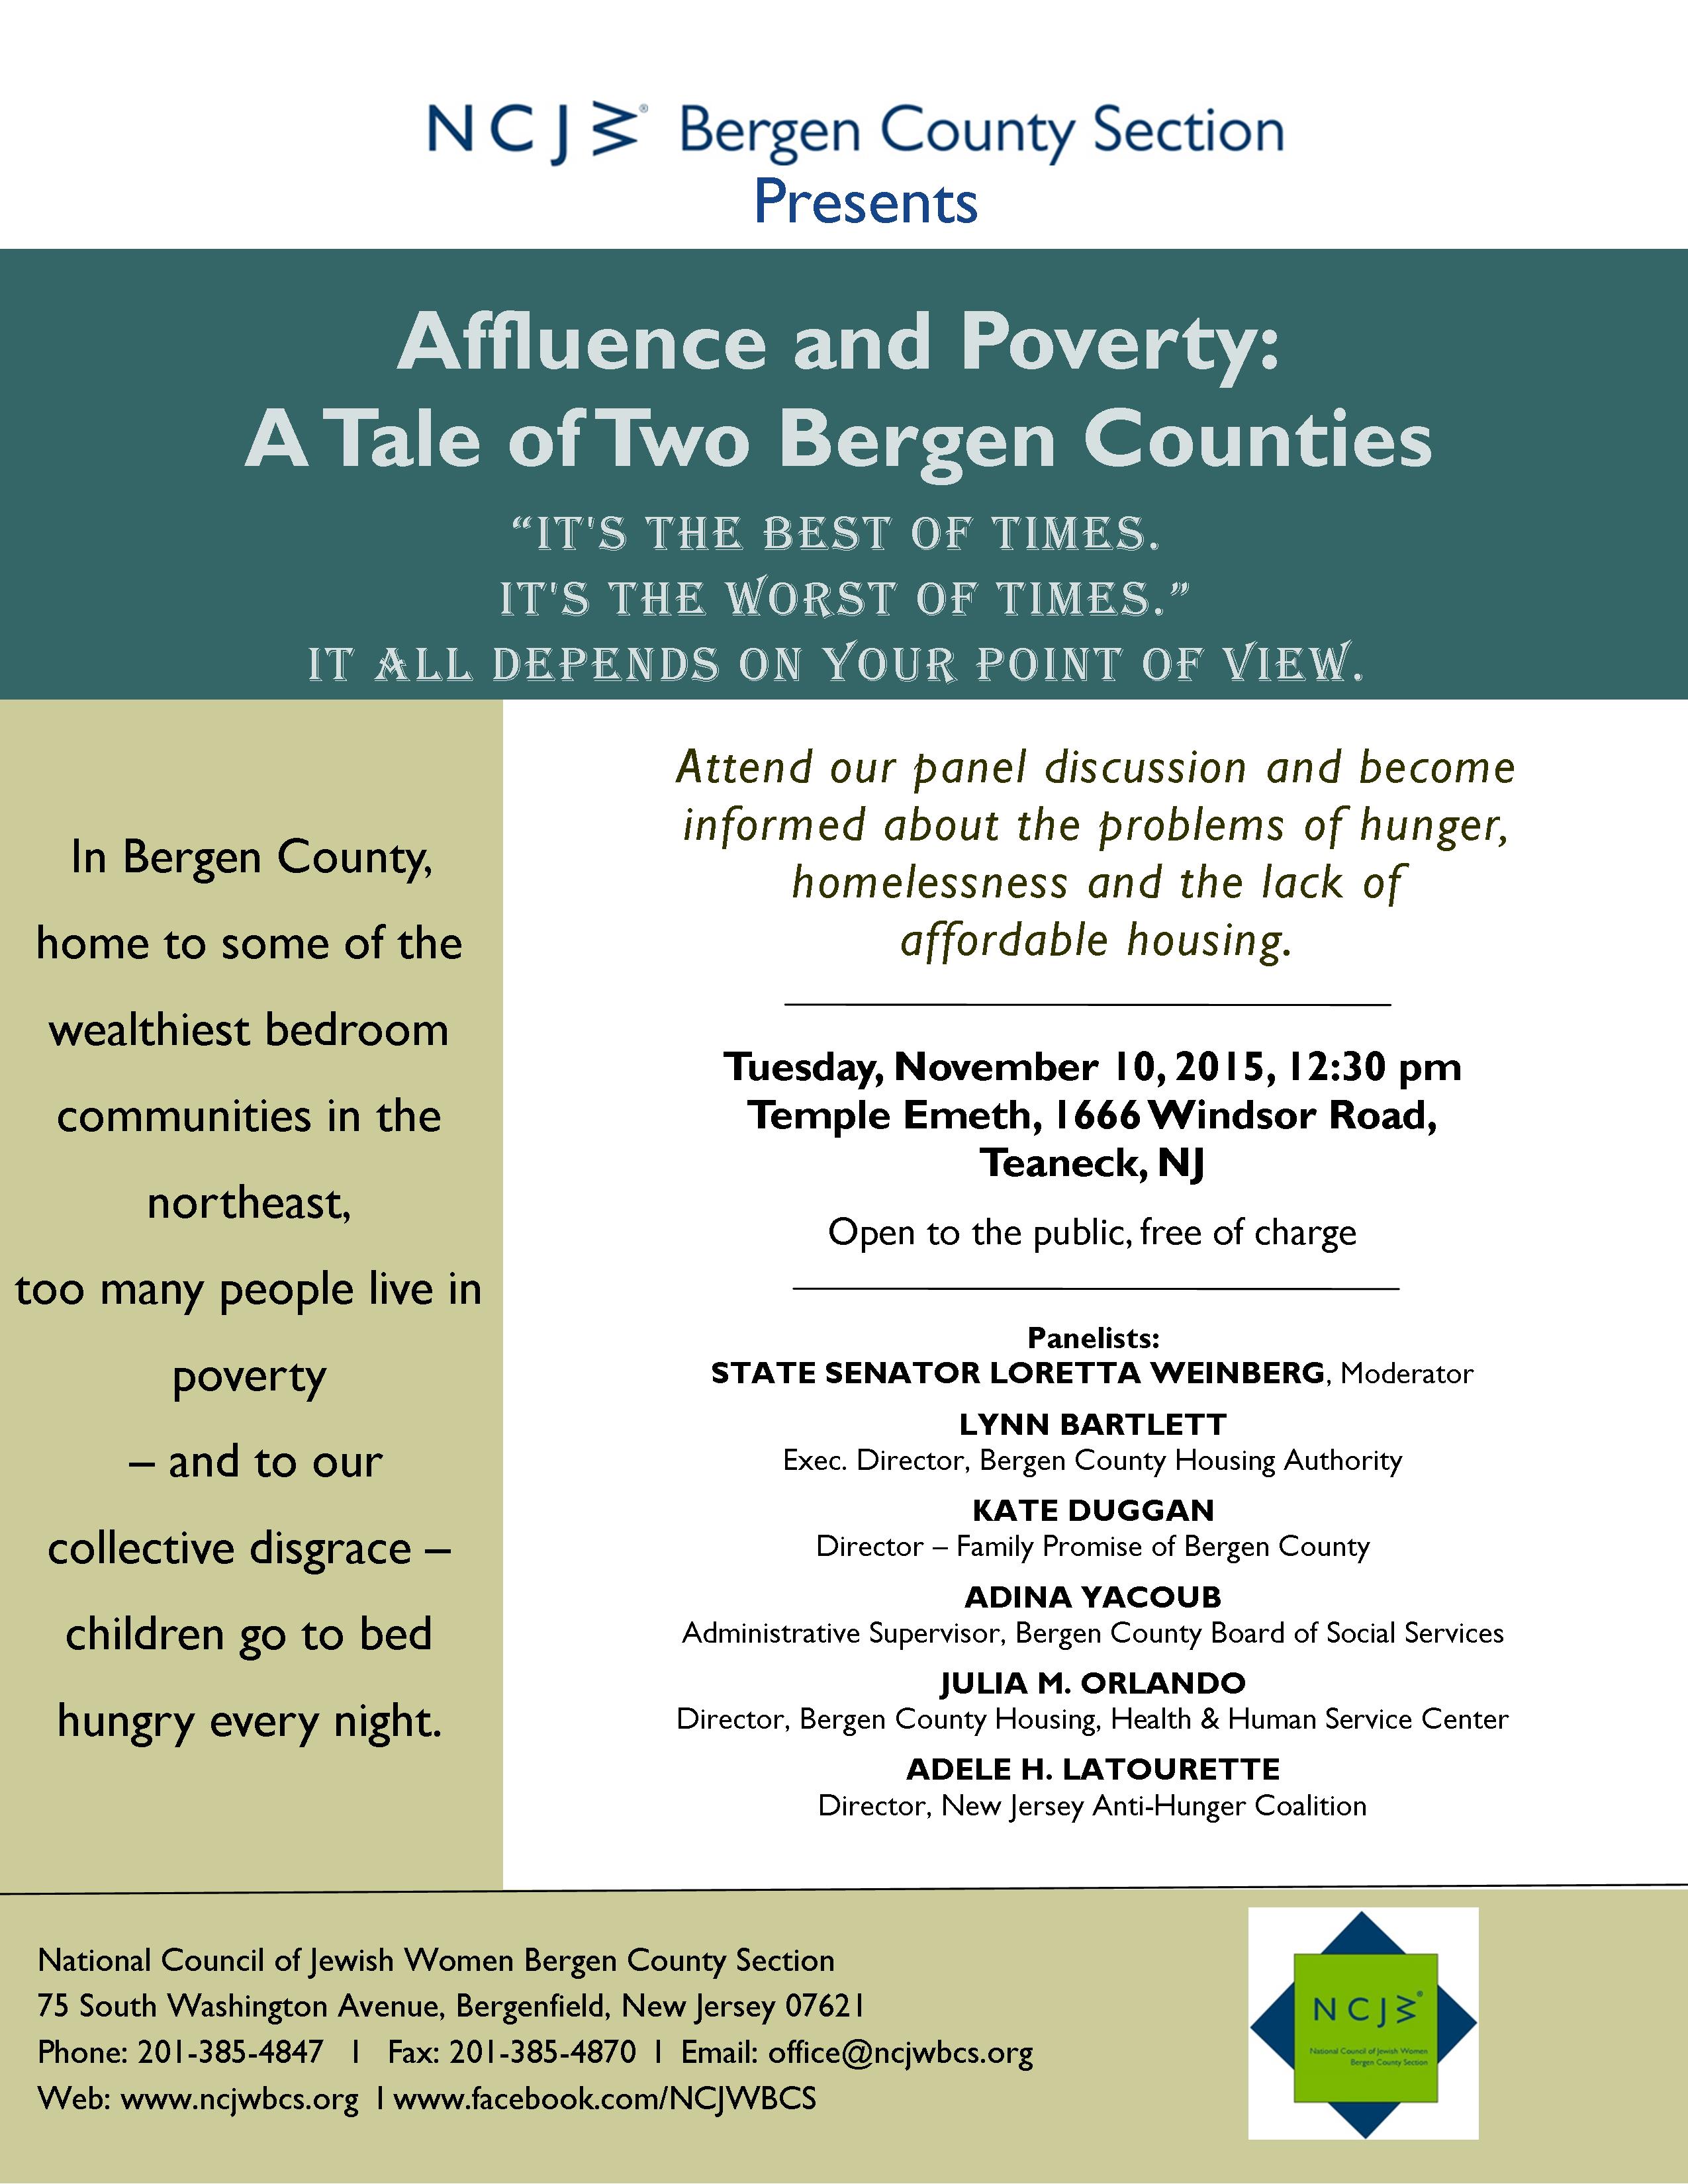 Affluence & Poverty Flyer 10-30-15 Family Promise update front REV 2